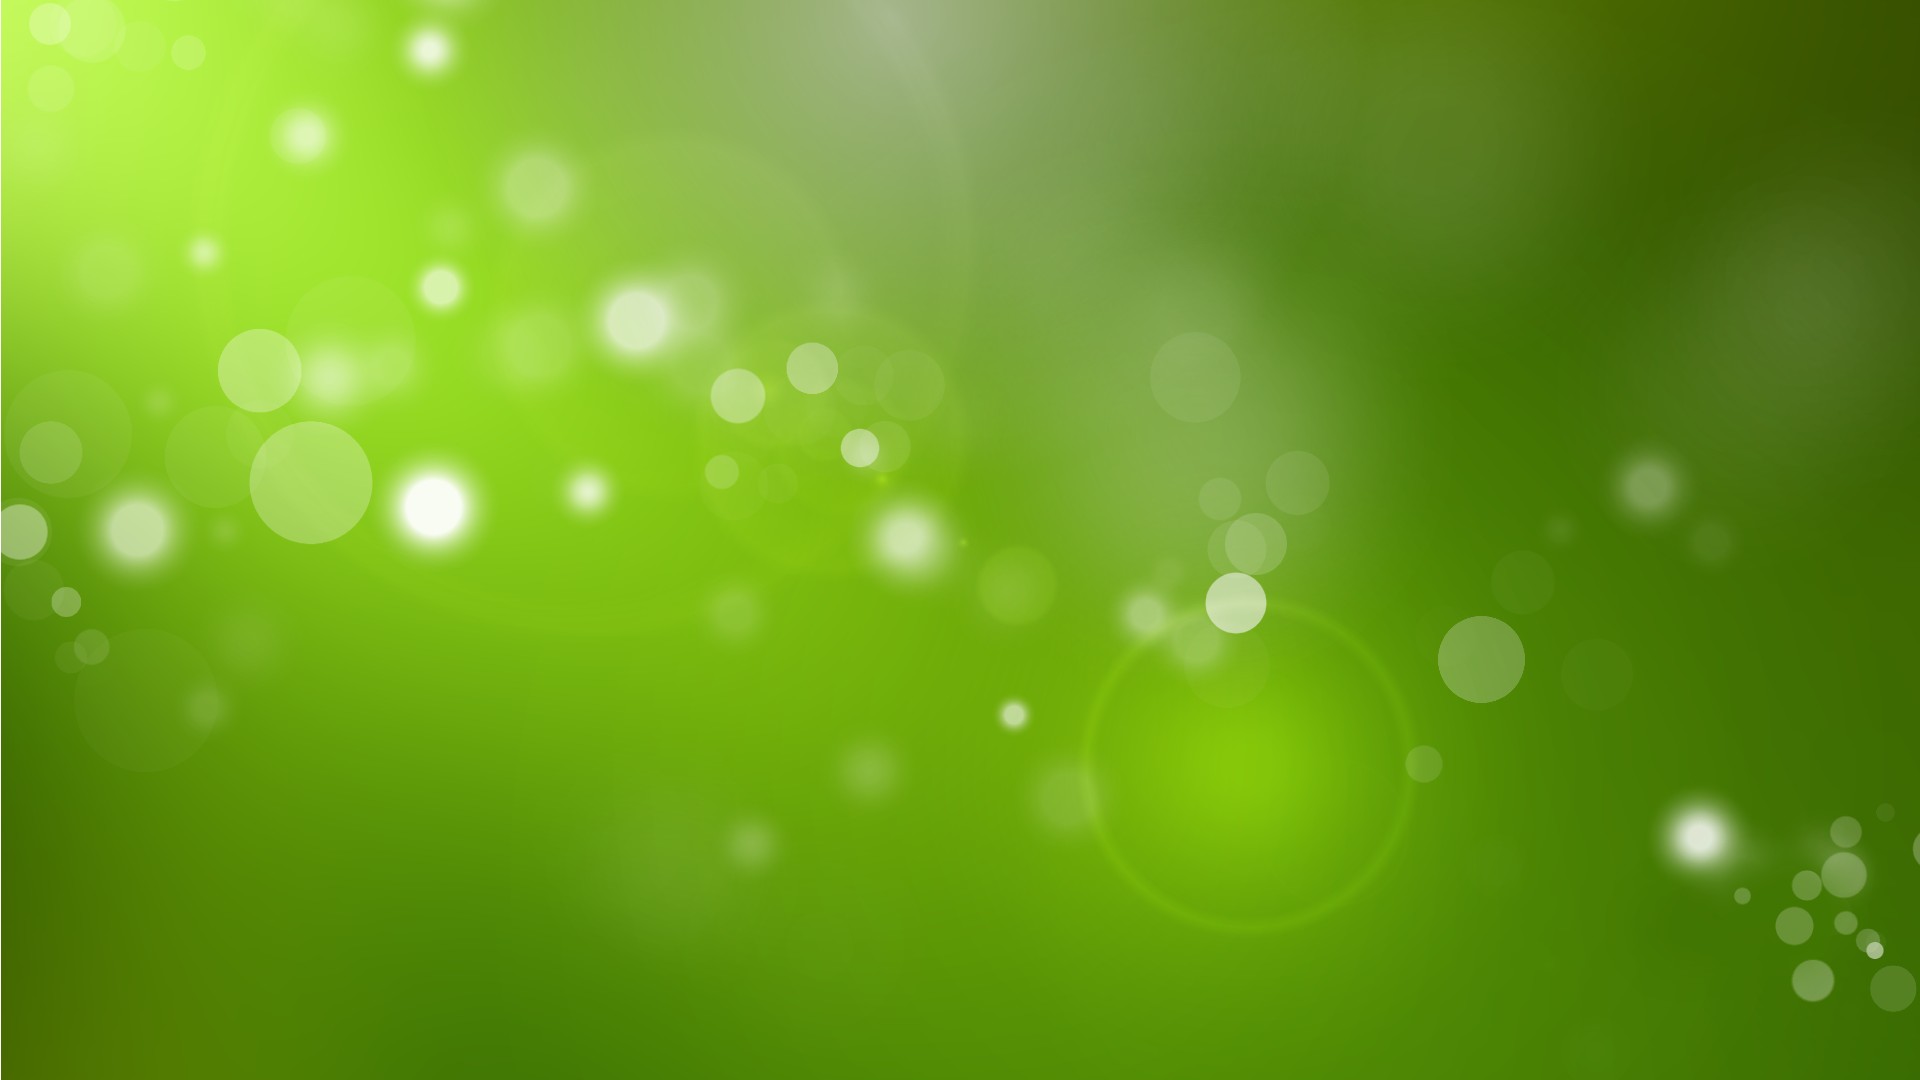 Green Colour HD Wallpaper with image resolution 1920x1080 pixel. You can make this wallpaper for your Desktop Computer Backgrounds, Mac Wallpapers, Android Lock screen or iPhone Screensavers